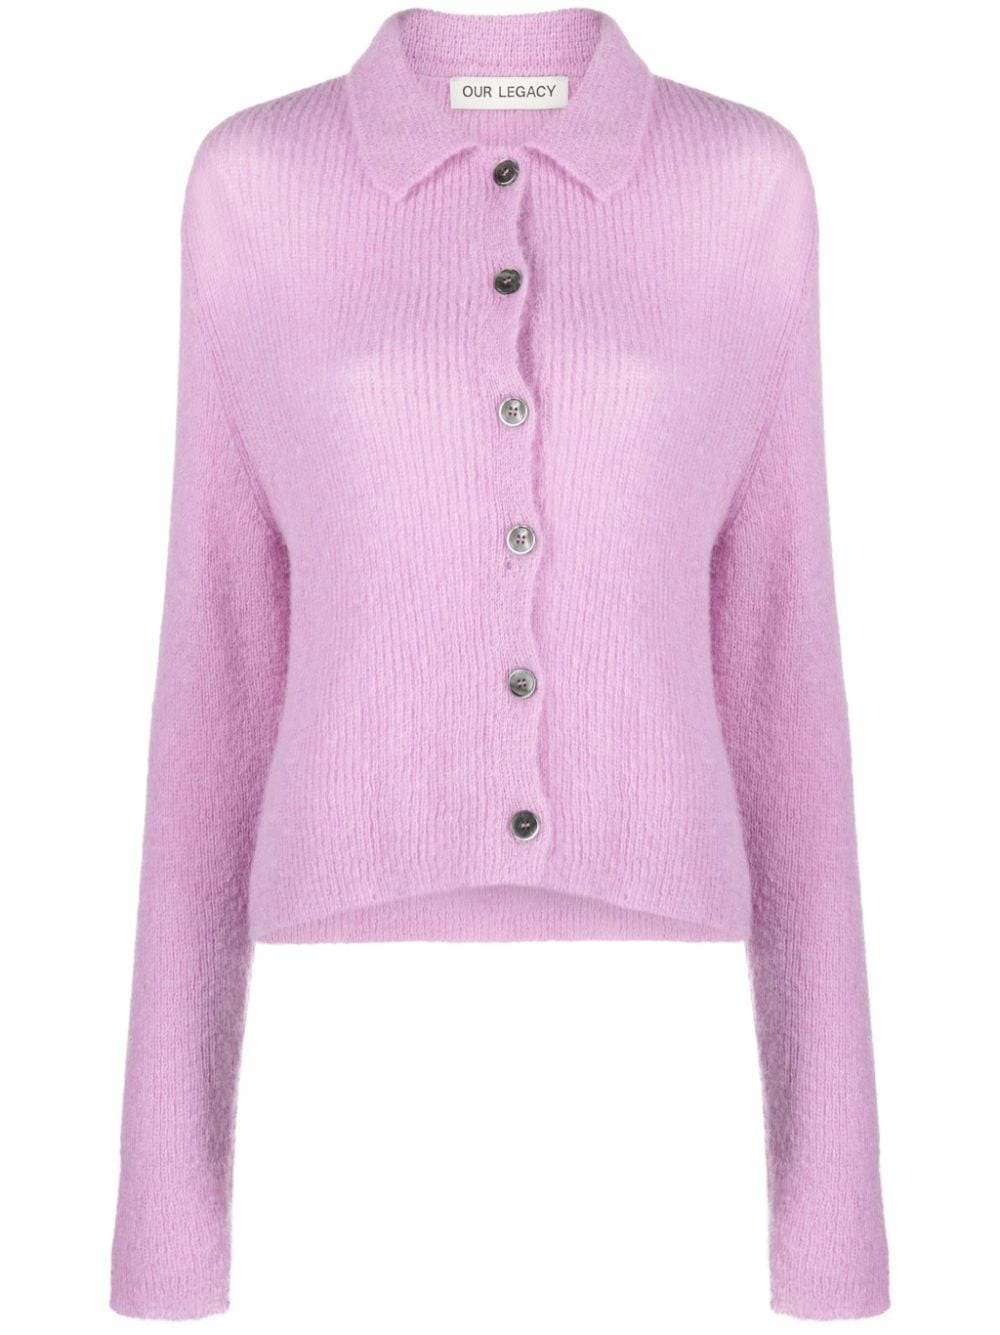 OUR LEGACY Gerippter Cardigan - Rosa von OUR LEGACY